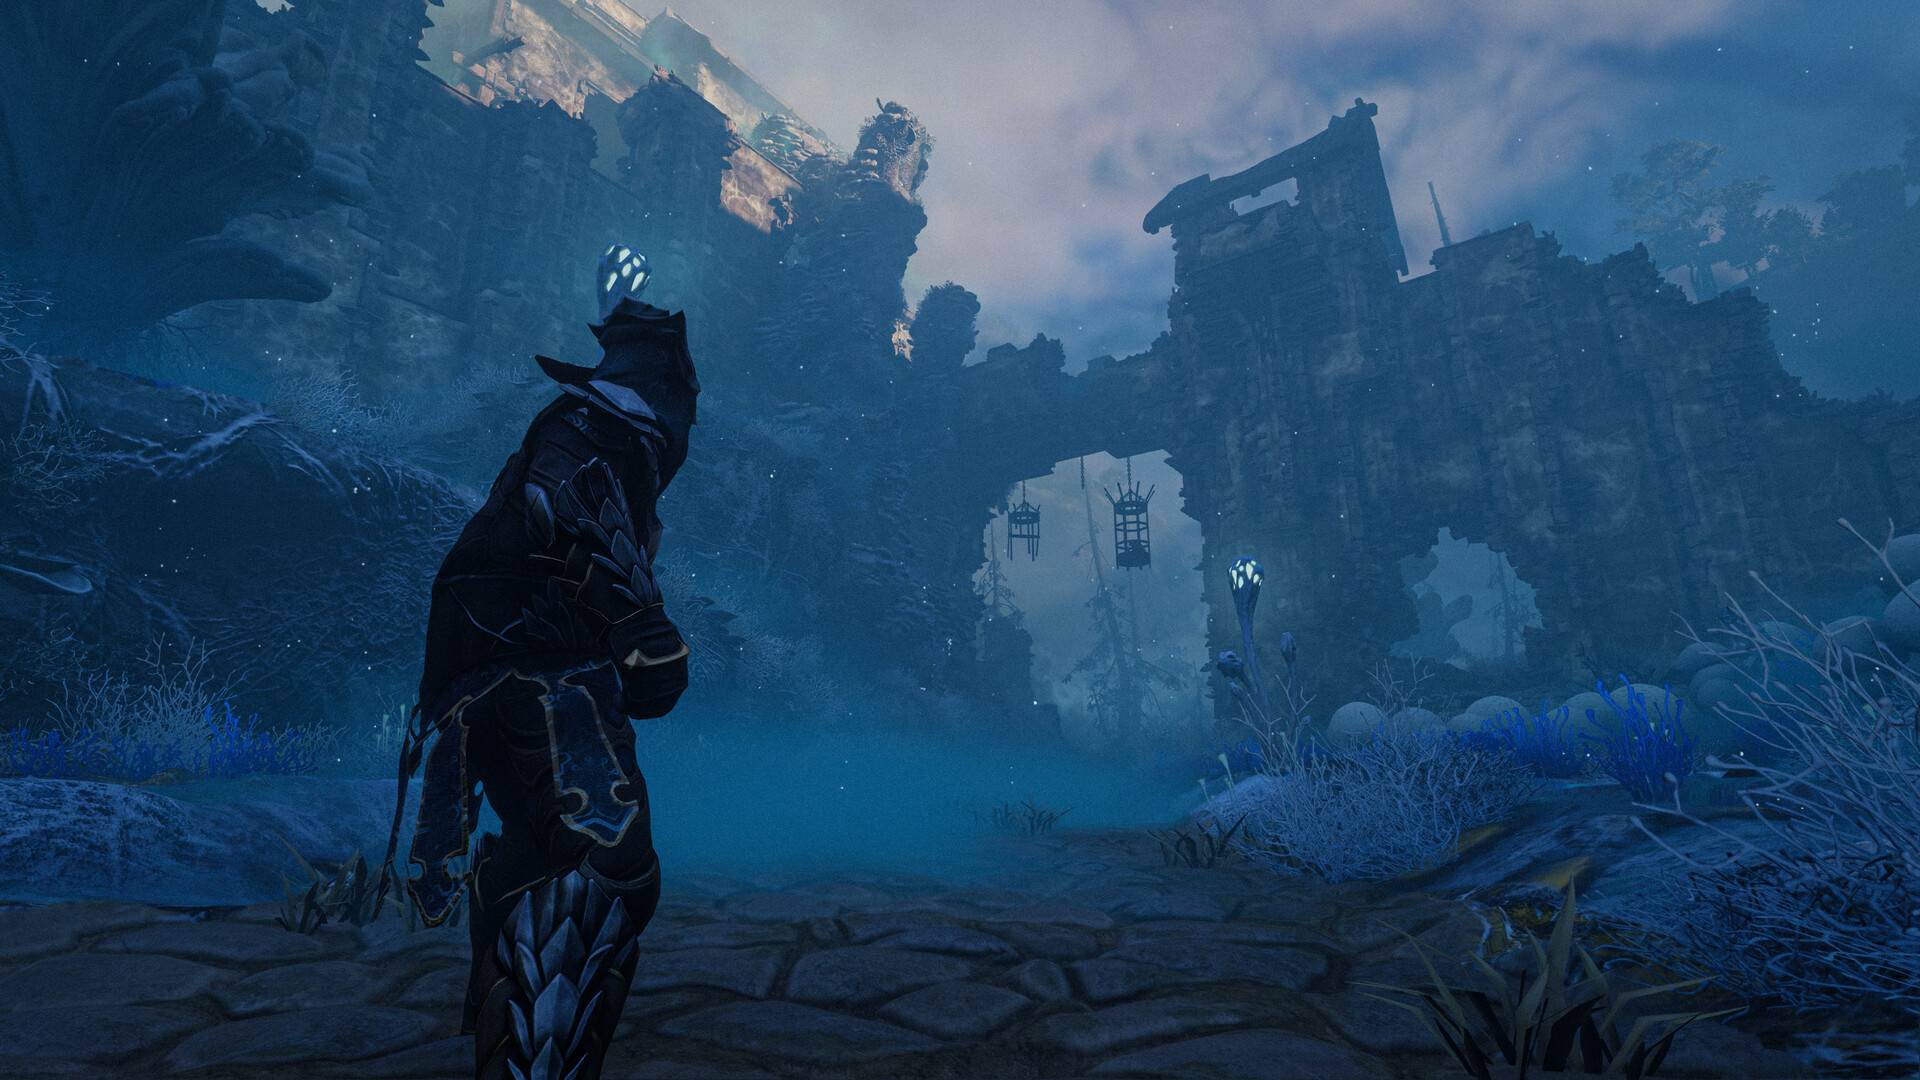 Enshrouded screenshot in game of a broken castle with road and surroundings